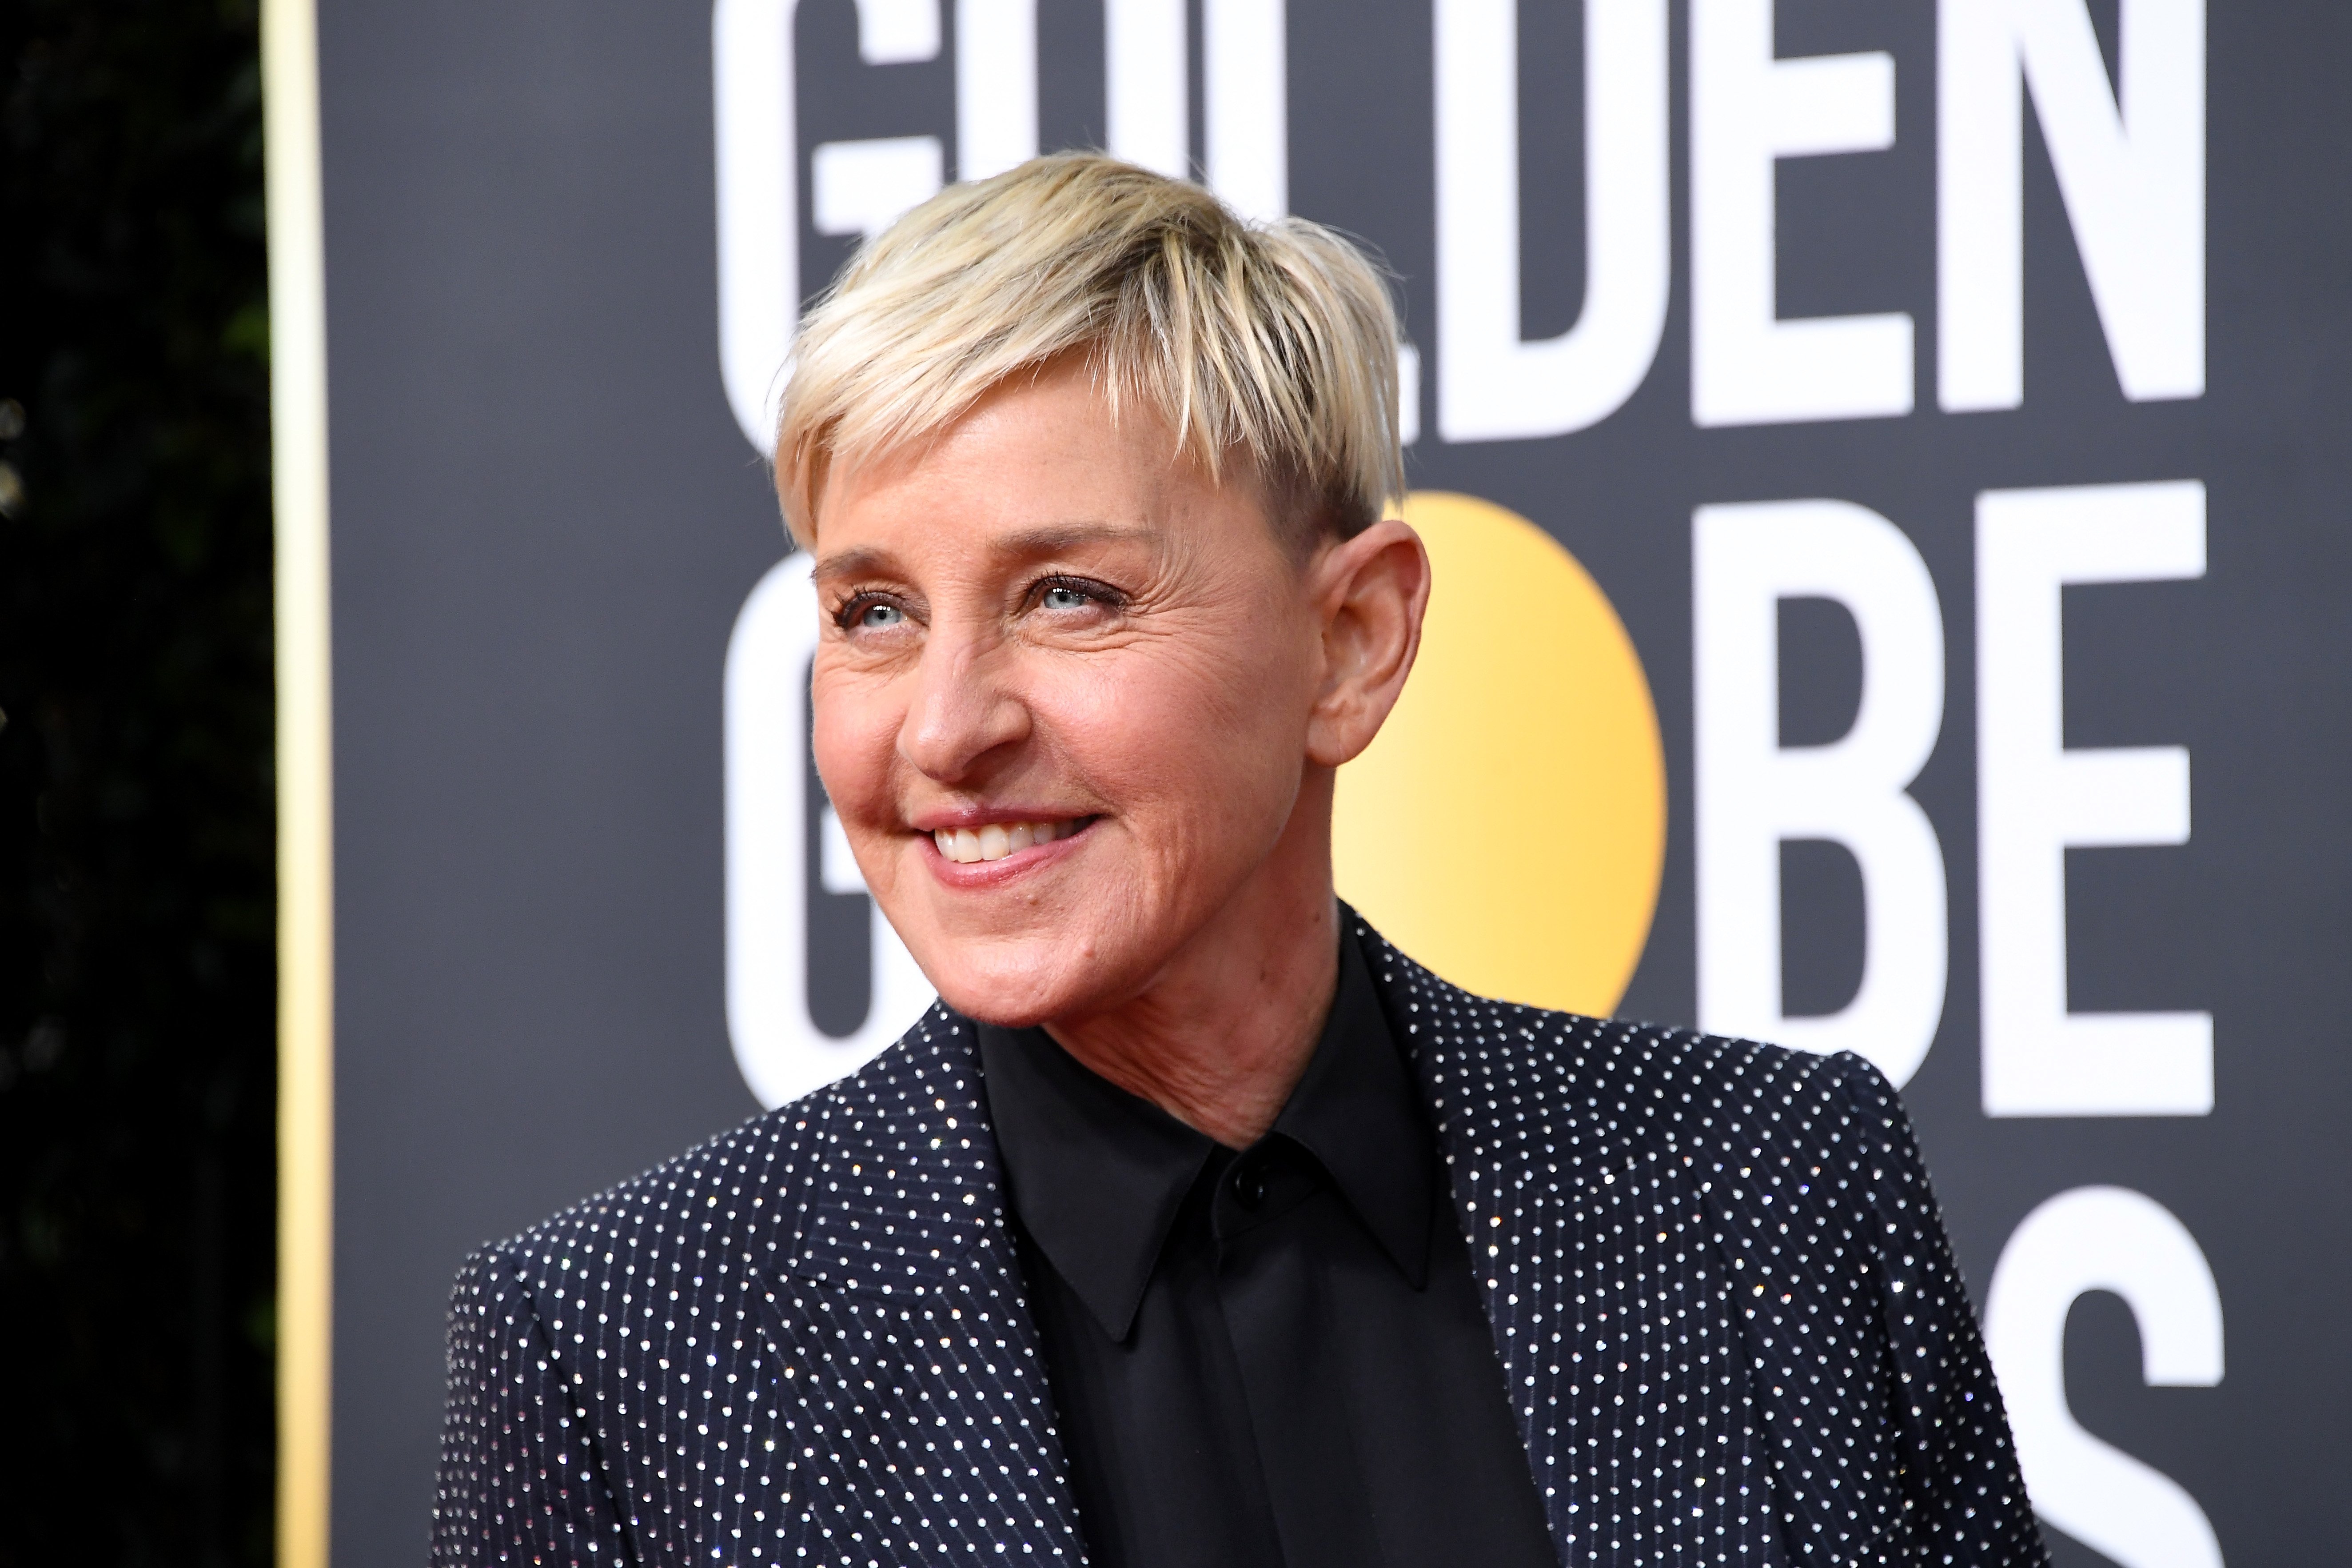 Ellen DeGeneres attends the 77th Annual Golden Globe Awards at The Beverly Hilton Hotel on January 05, 2020 | Photo: GettyImages